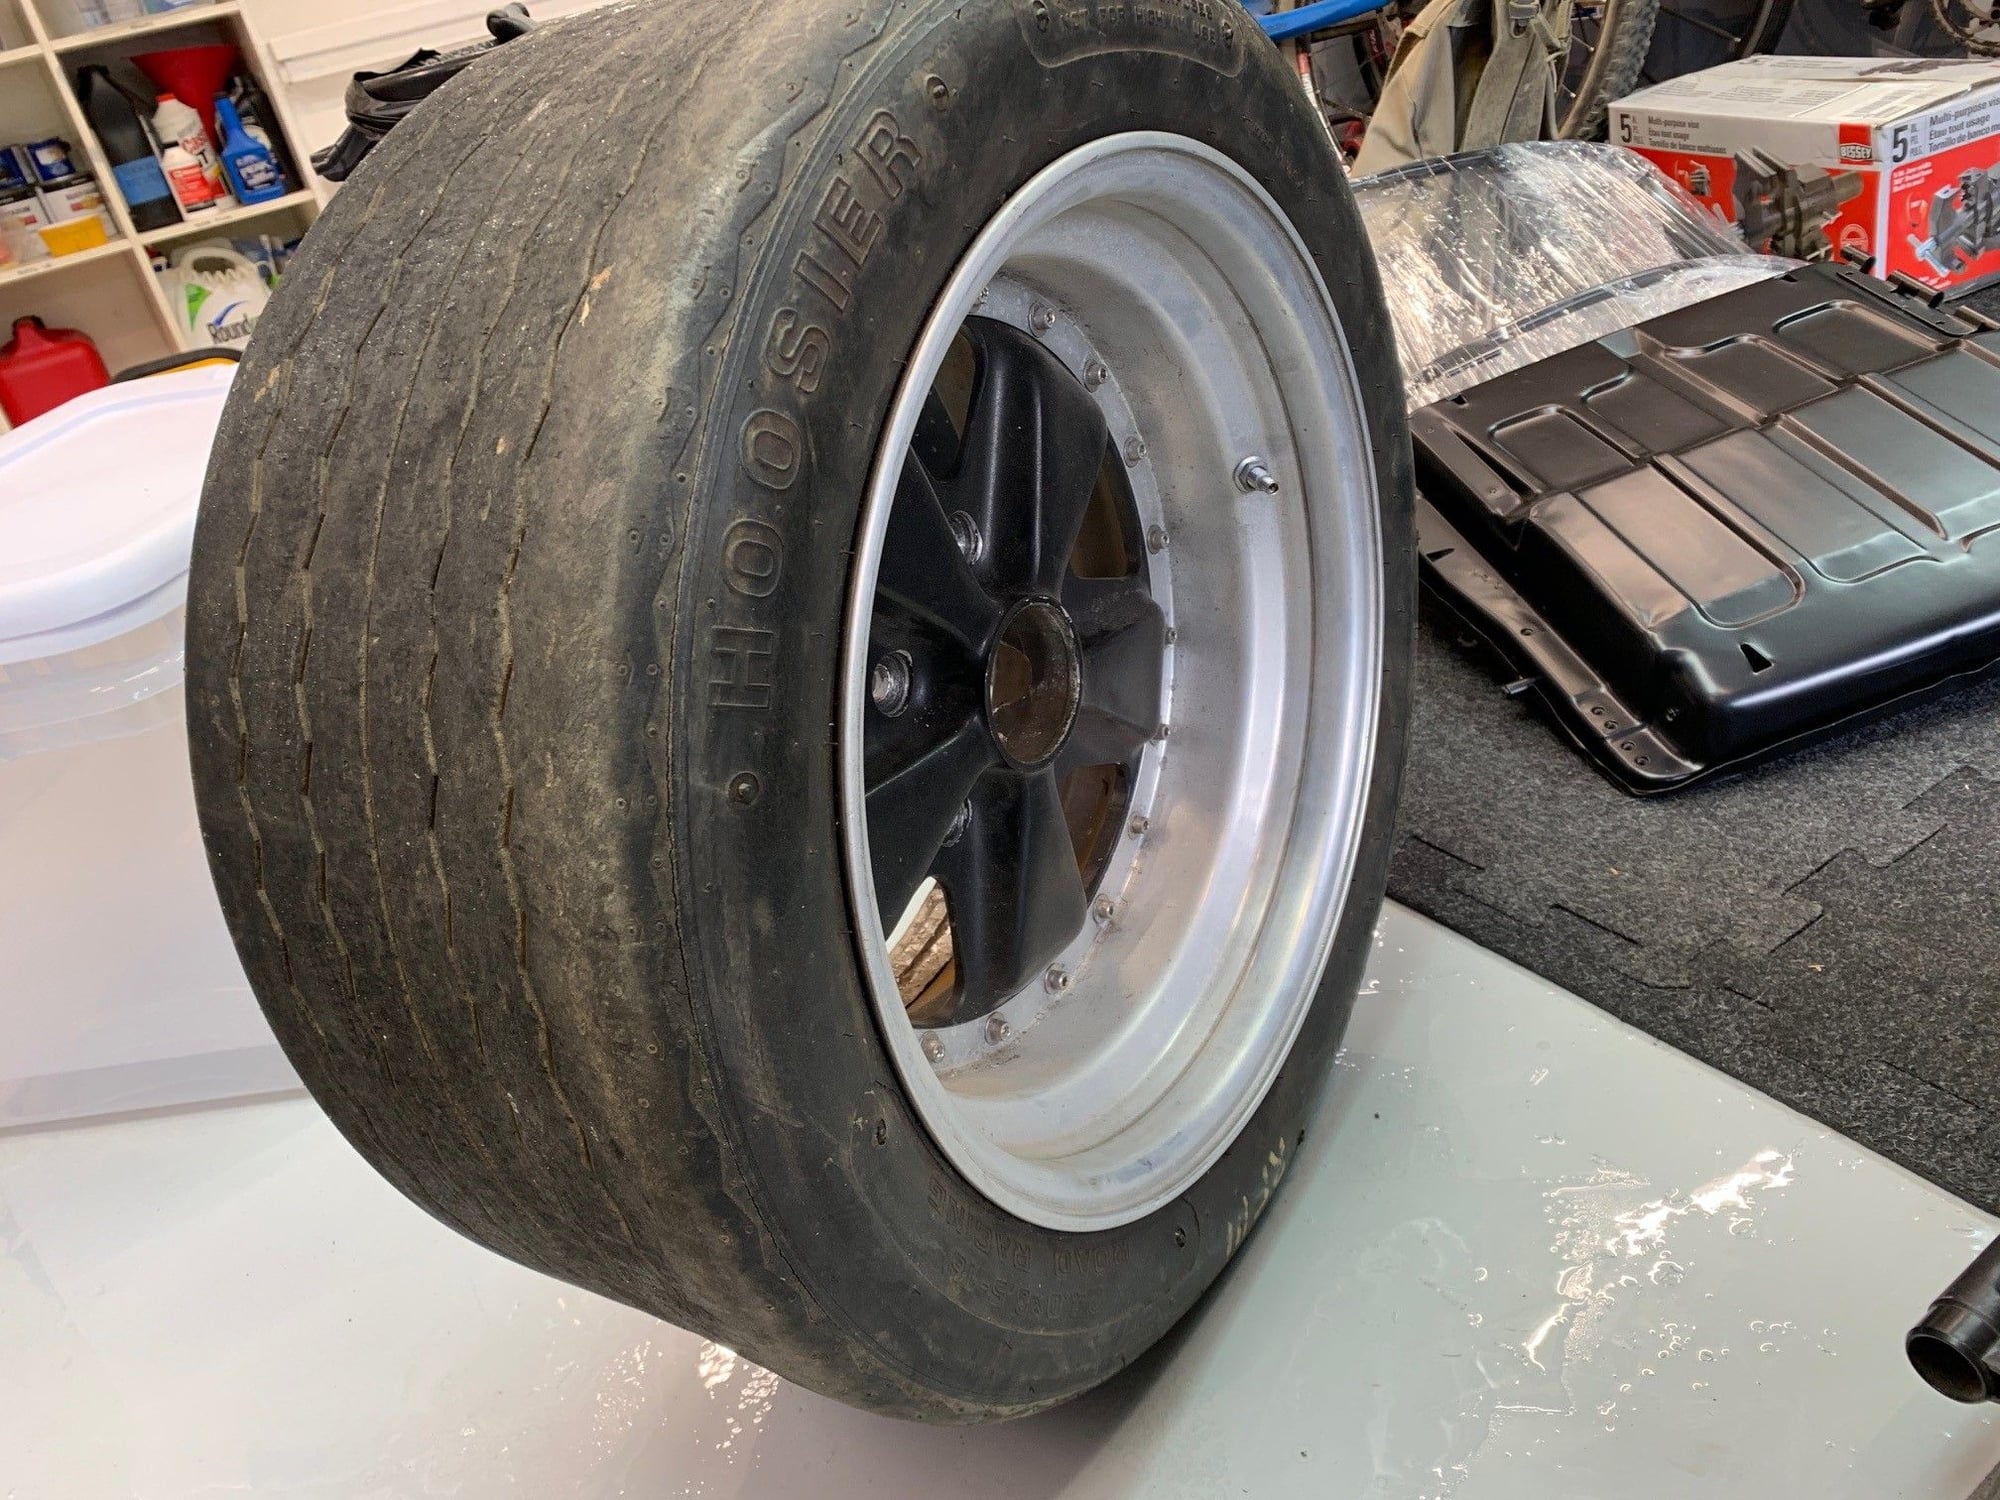 Wheels and Tires/Axles - set of FUCHS racing Wheels - Used - 1973 to 1978 Porsche 911 - Los Angeles, CA 90024, United States